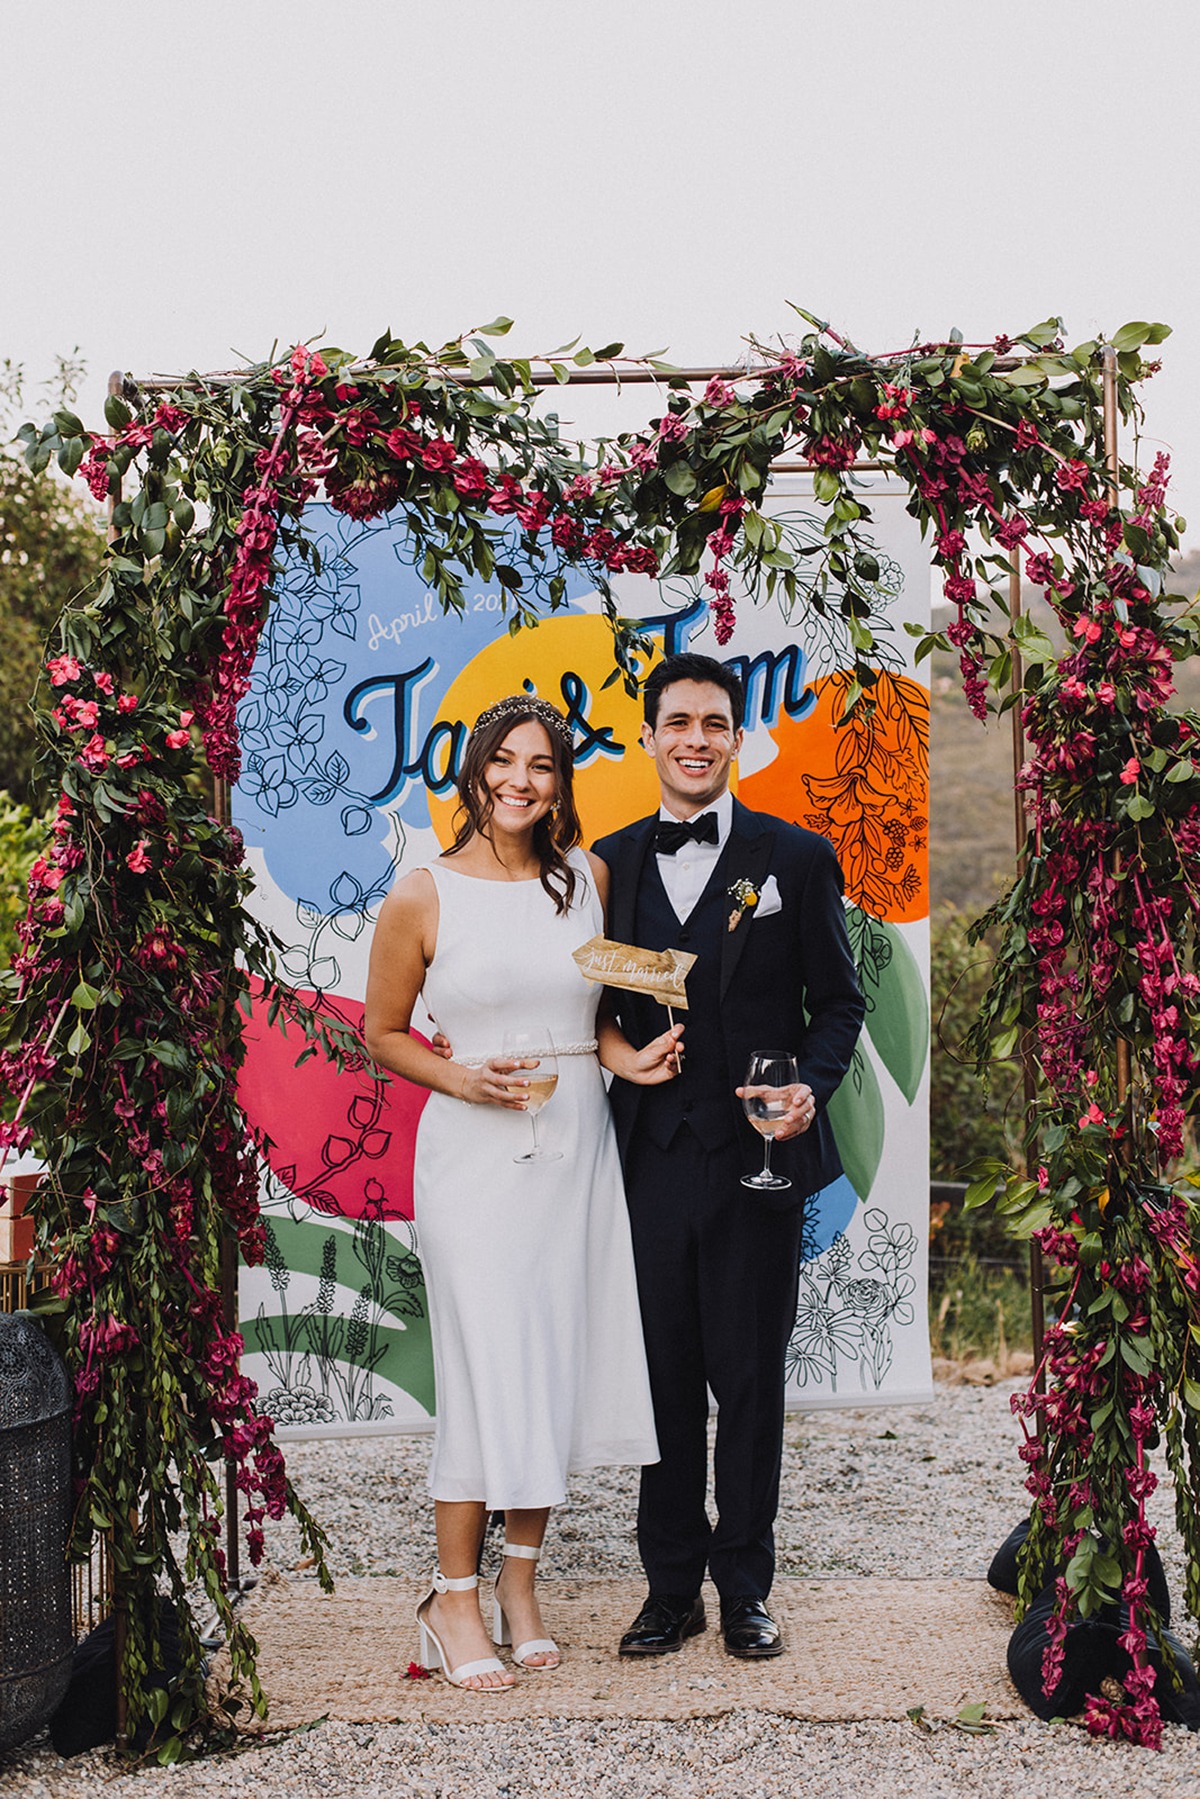 Intention-Filled Colorful Wedding In The Santa Monica Hills